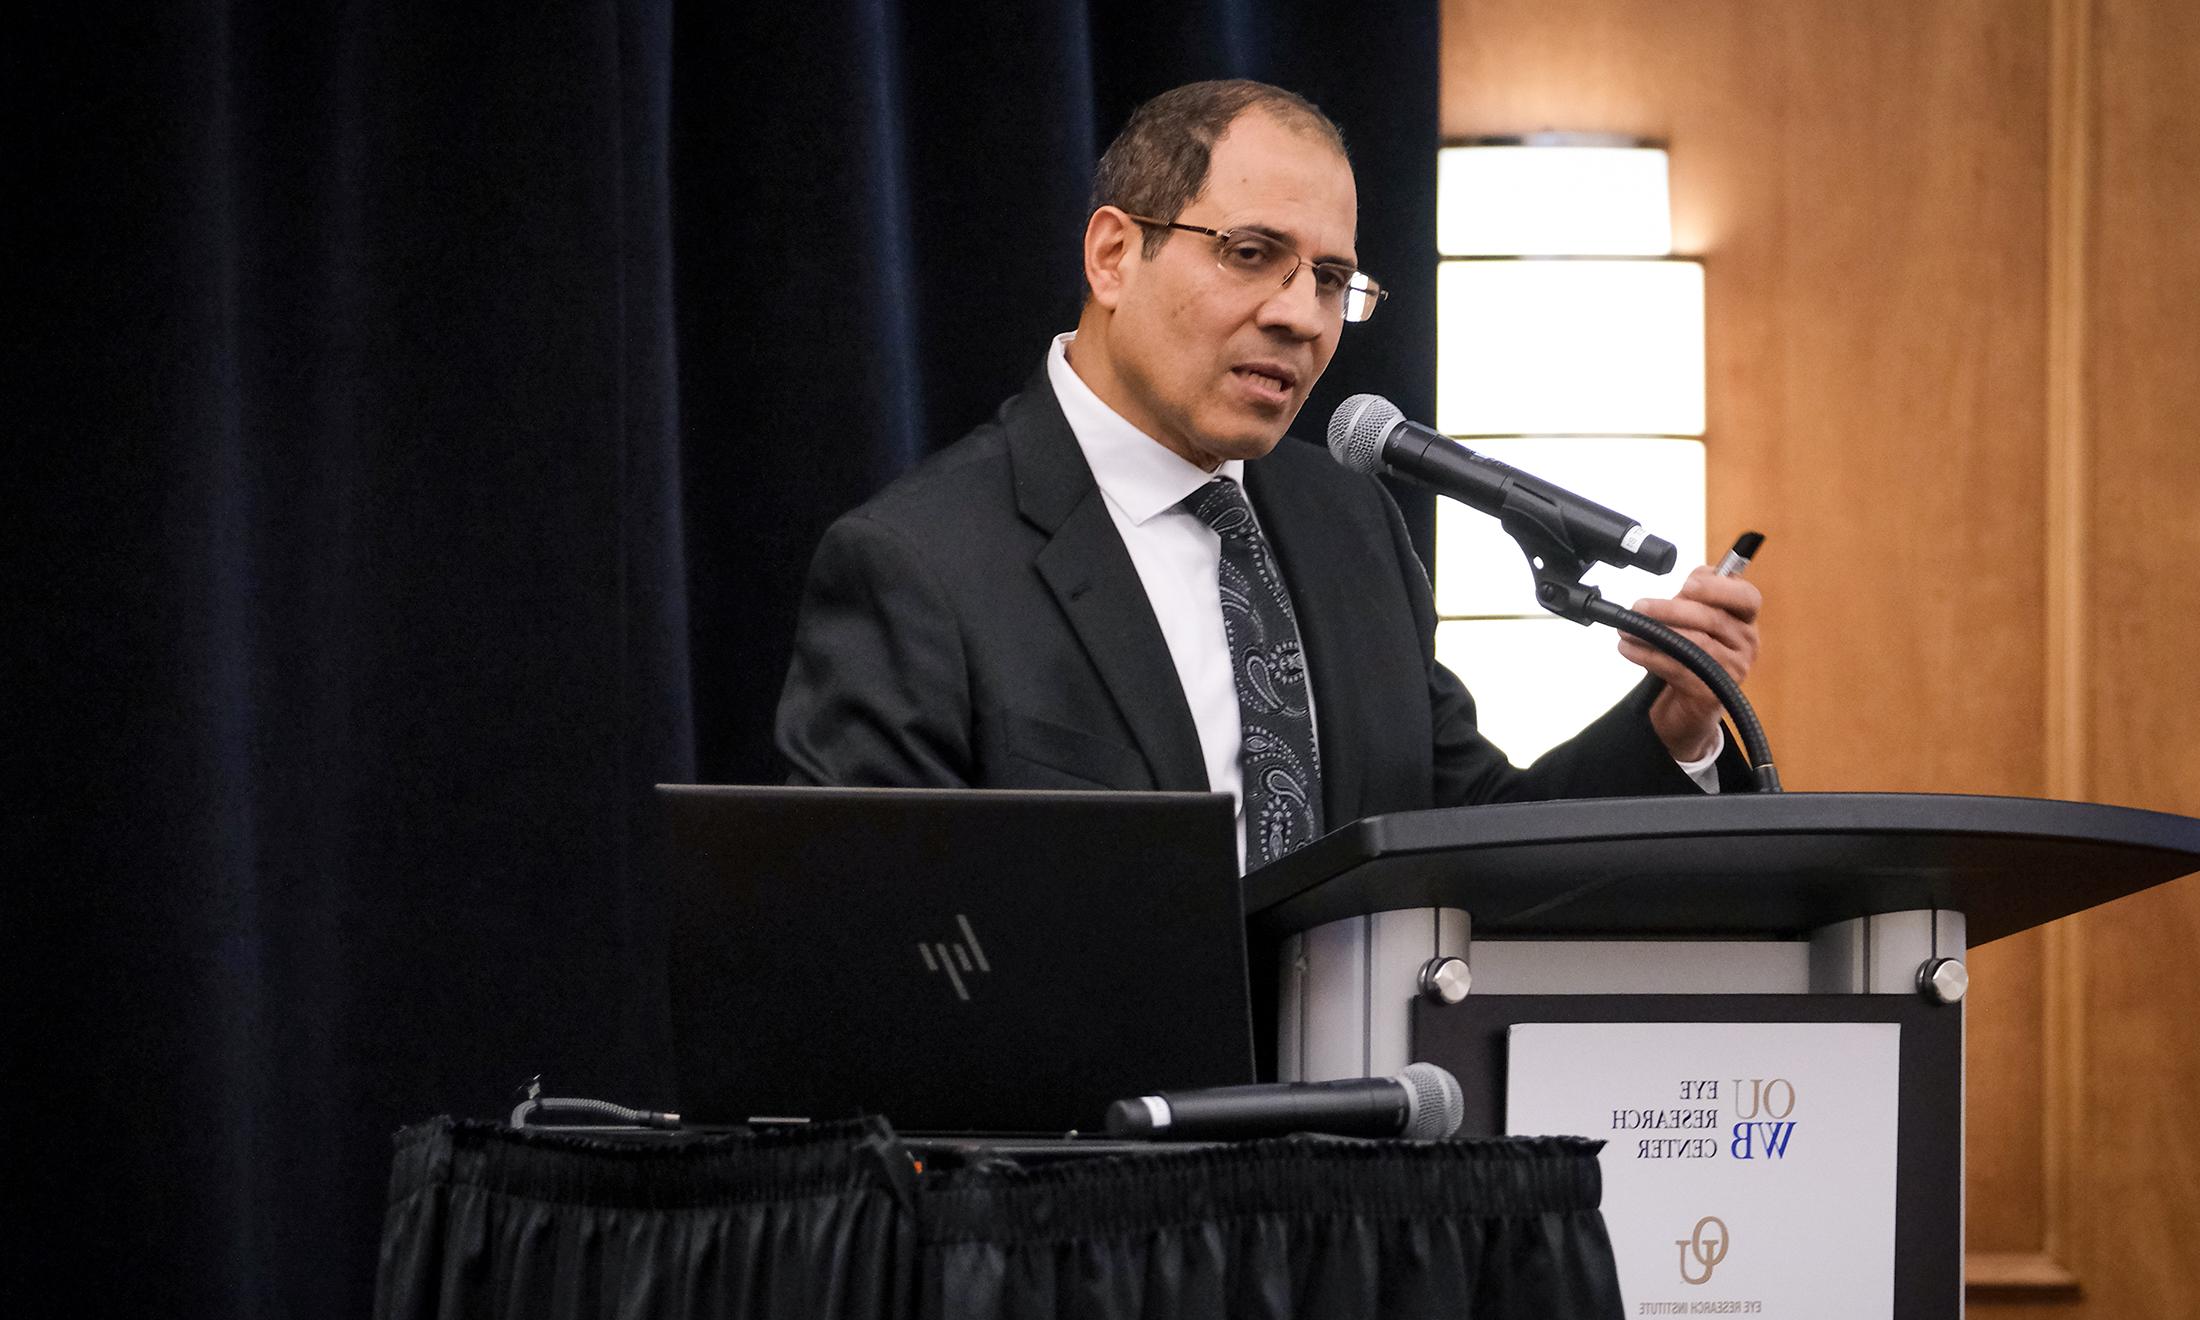 An image of Dr. Al-Shabrawey speaking at the event